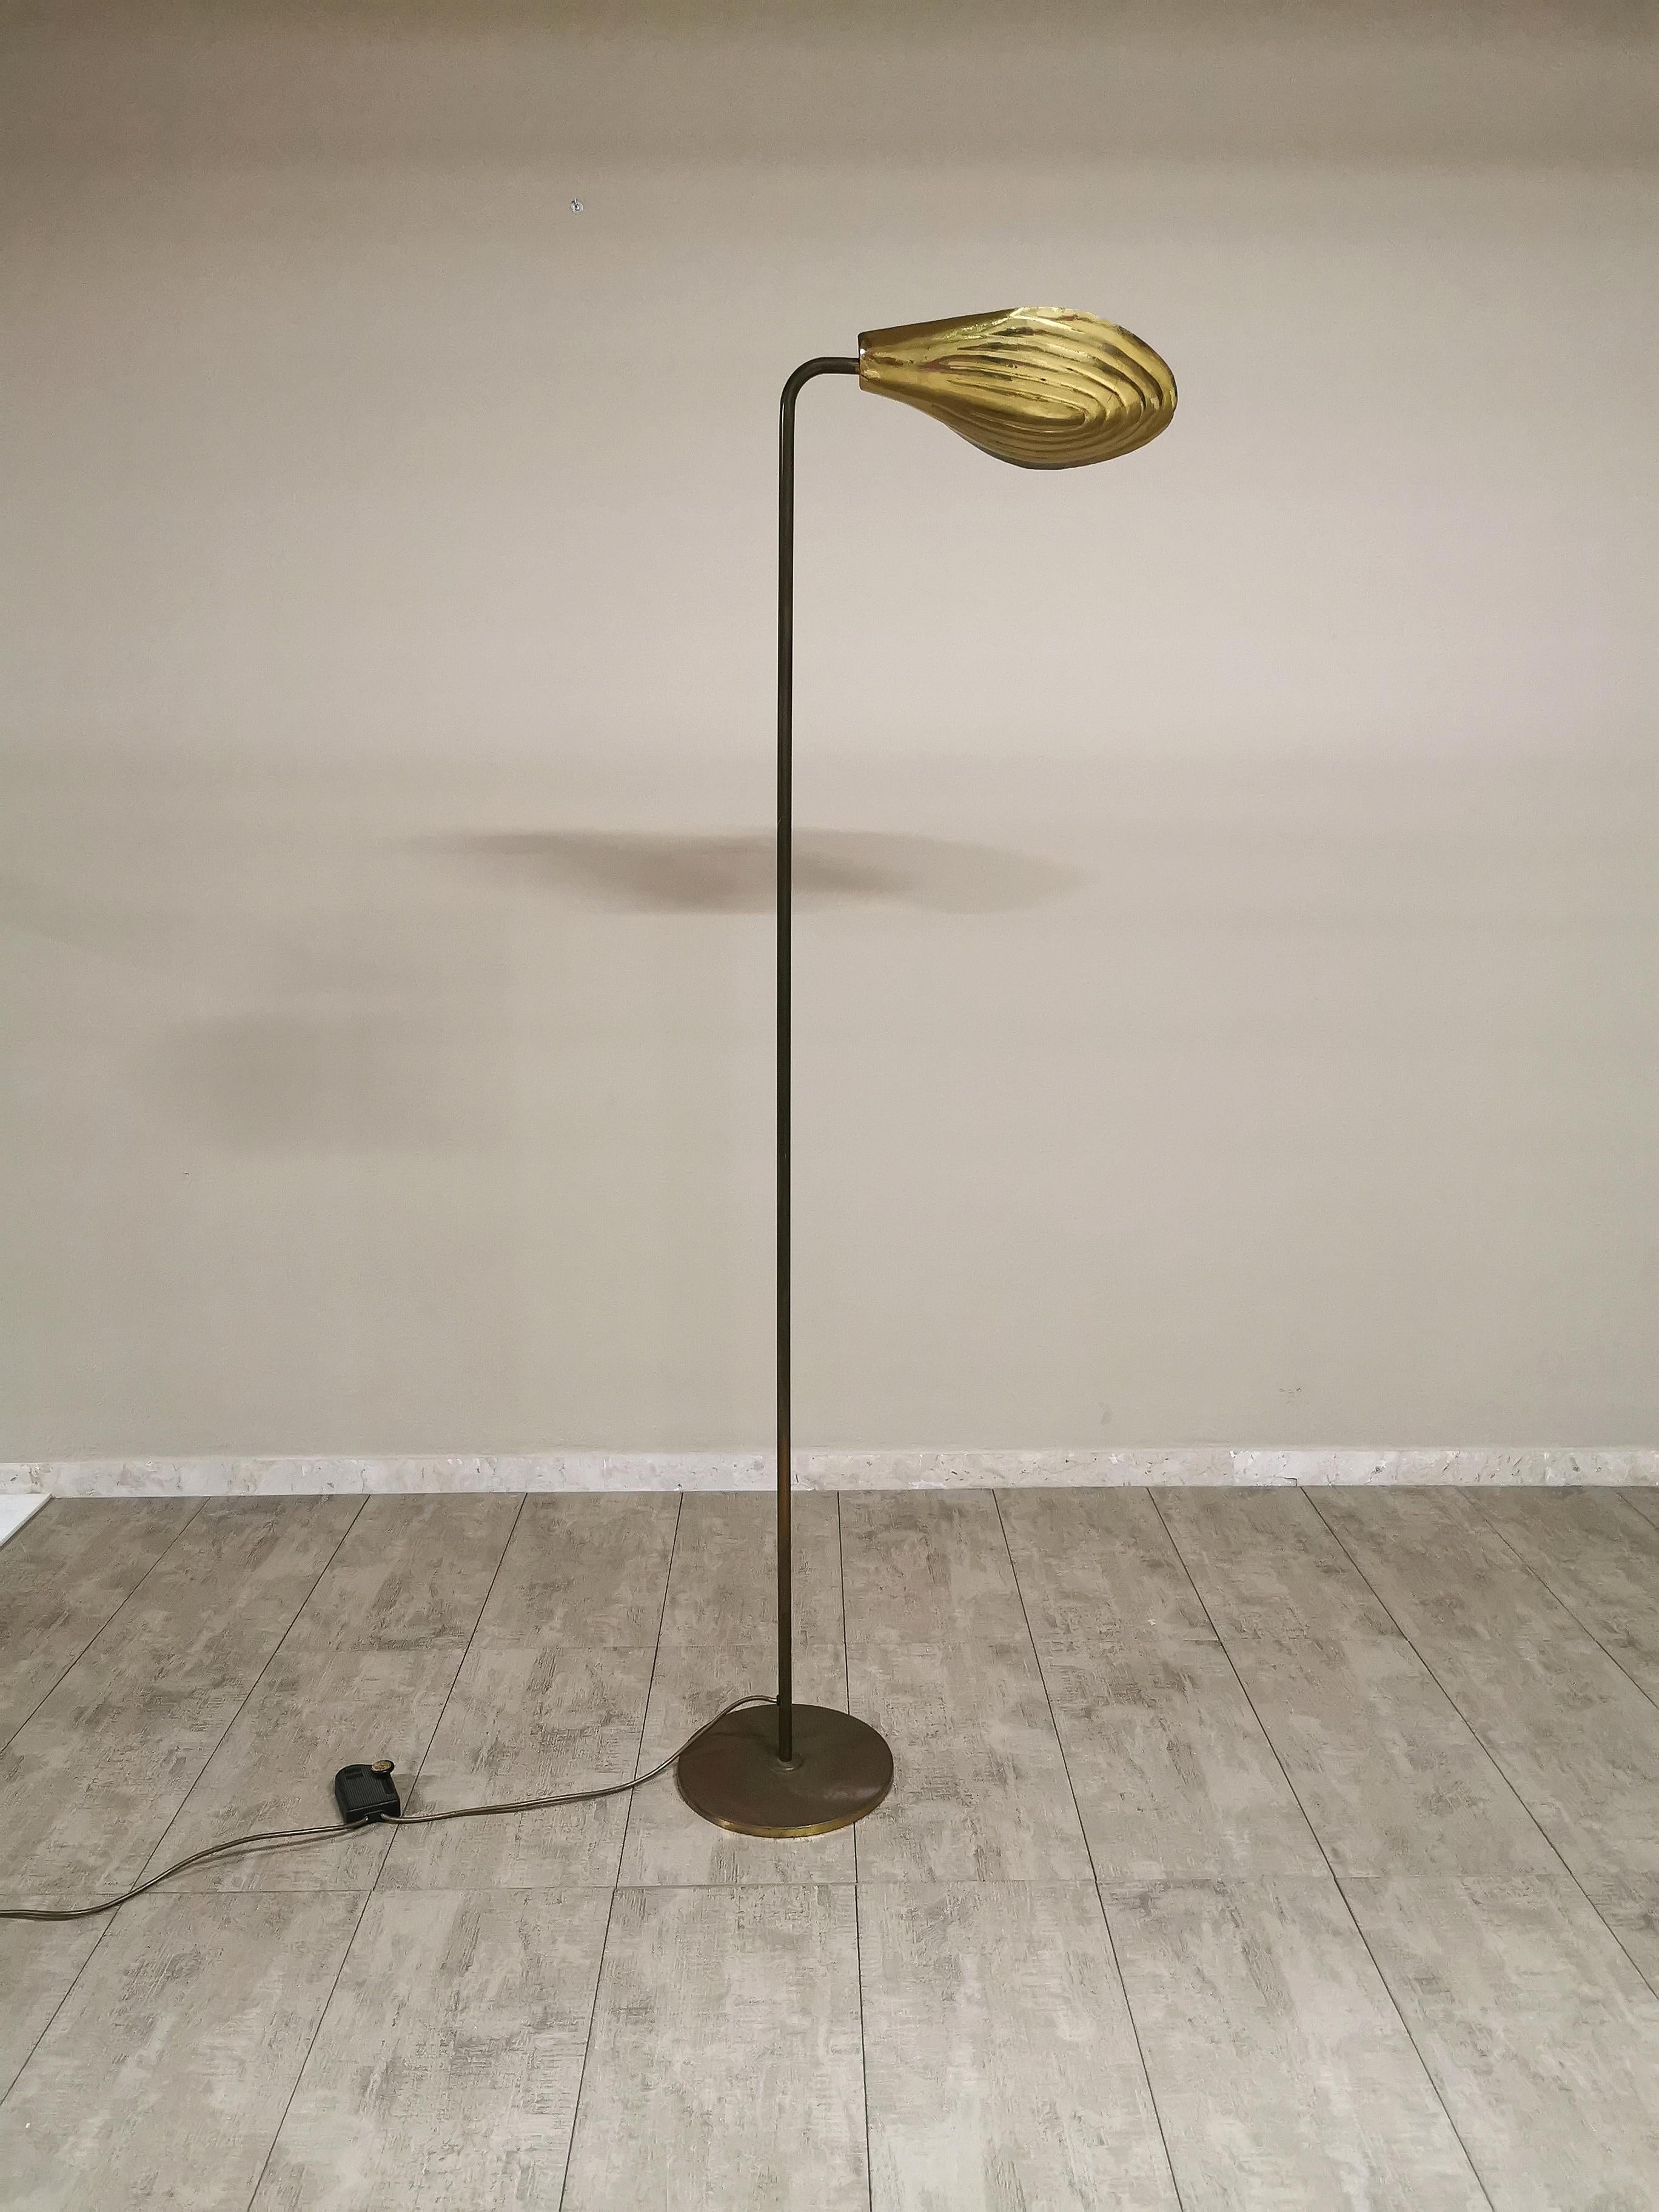 Particular halogen floor lamp by Relco Milano, entirely in brass with Directional shell-shaped diffuser and original dimmer. Italian production from the 1980s.